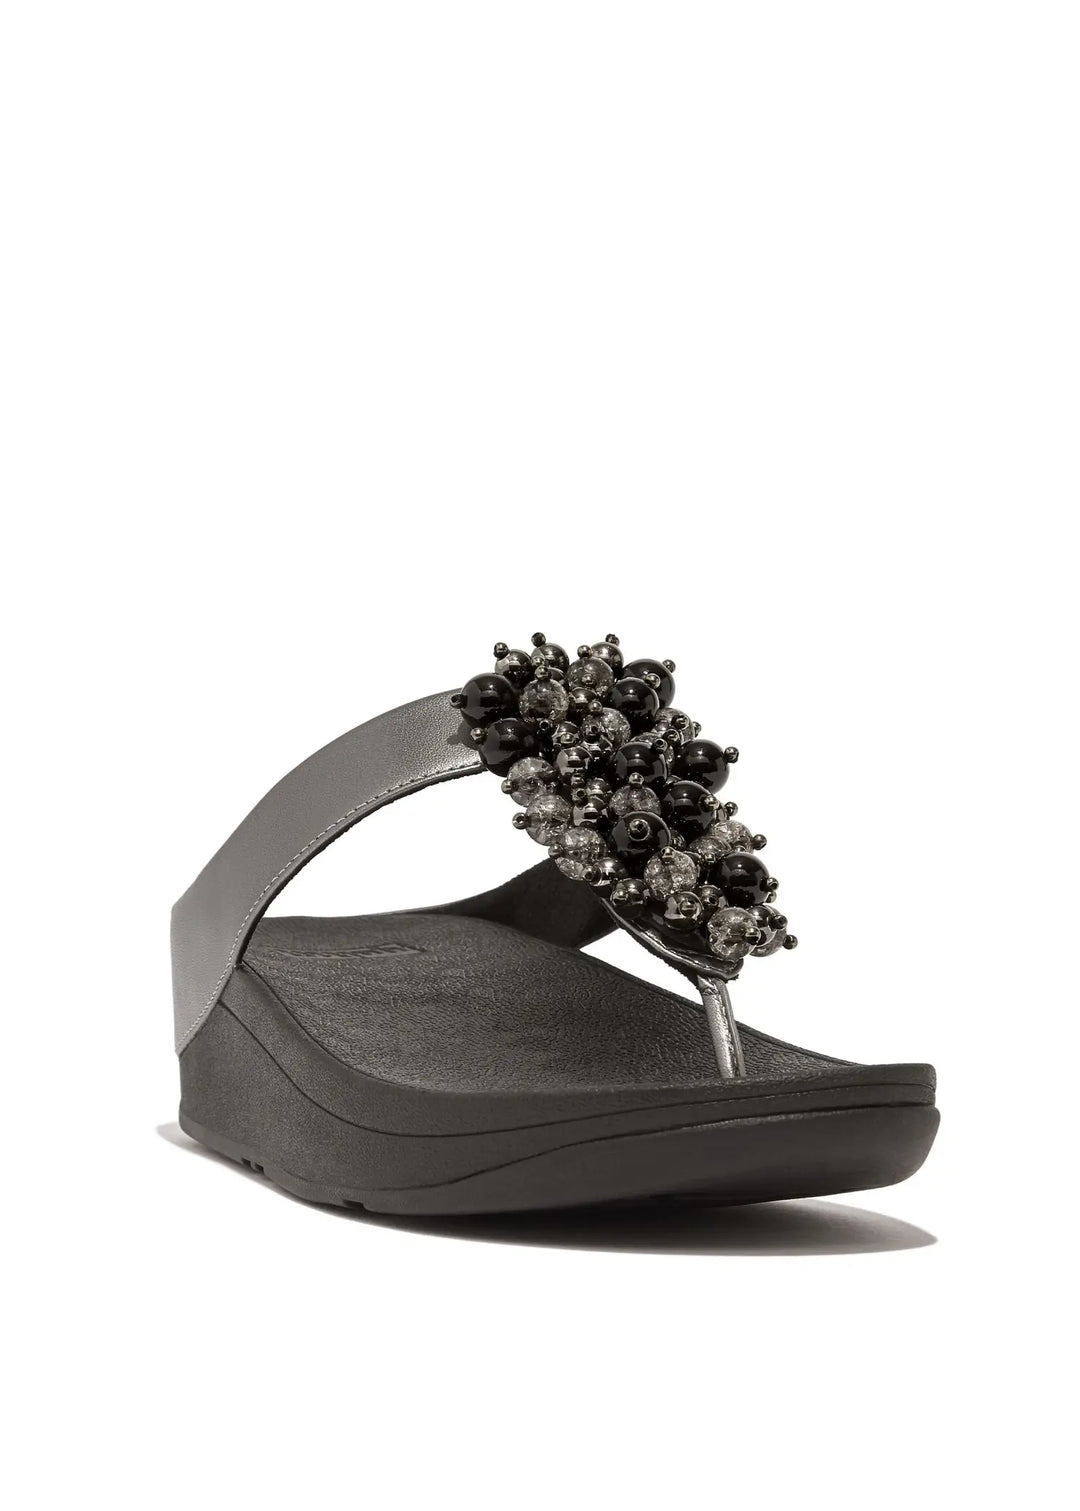 Fitflop - Fino Bauble Bead Toe Post Sandals